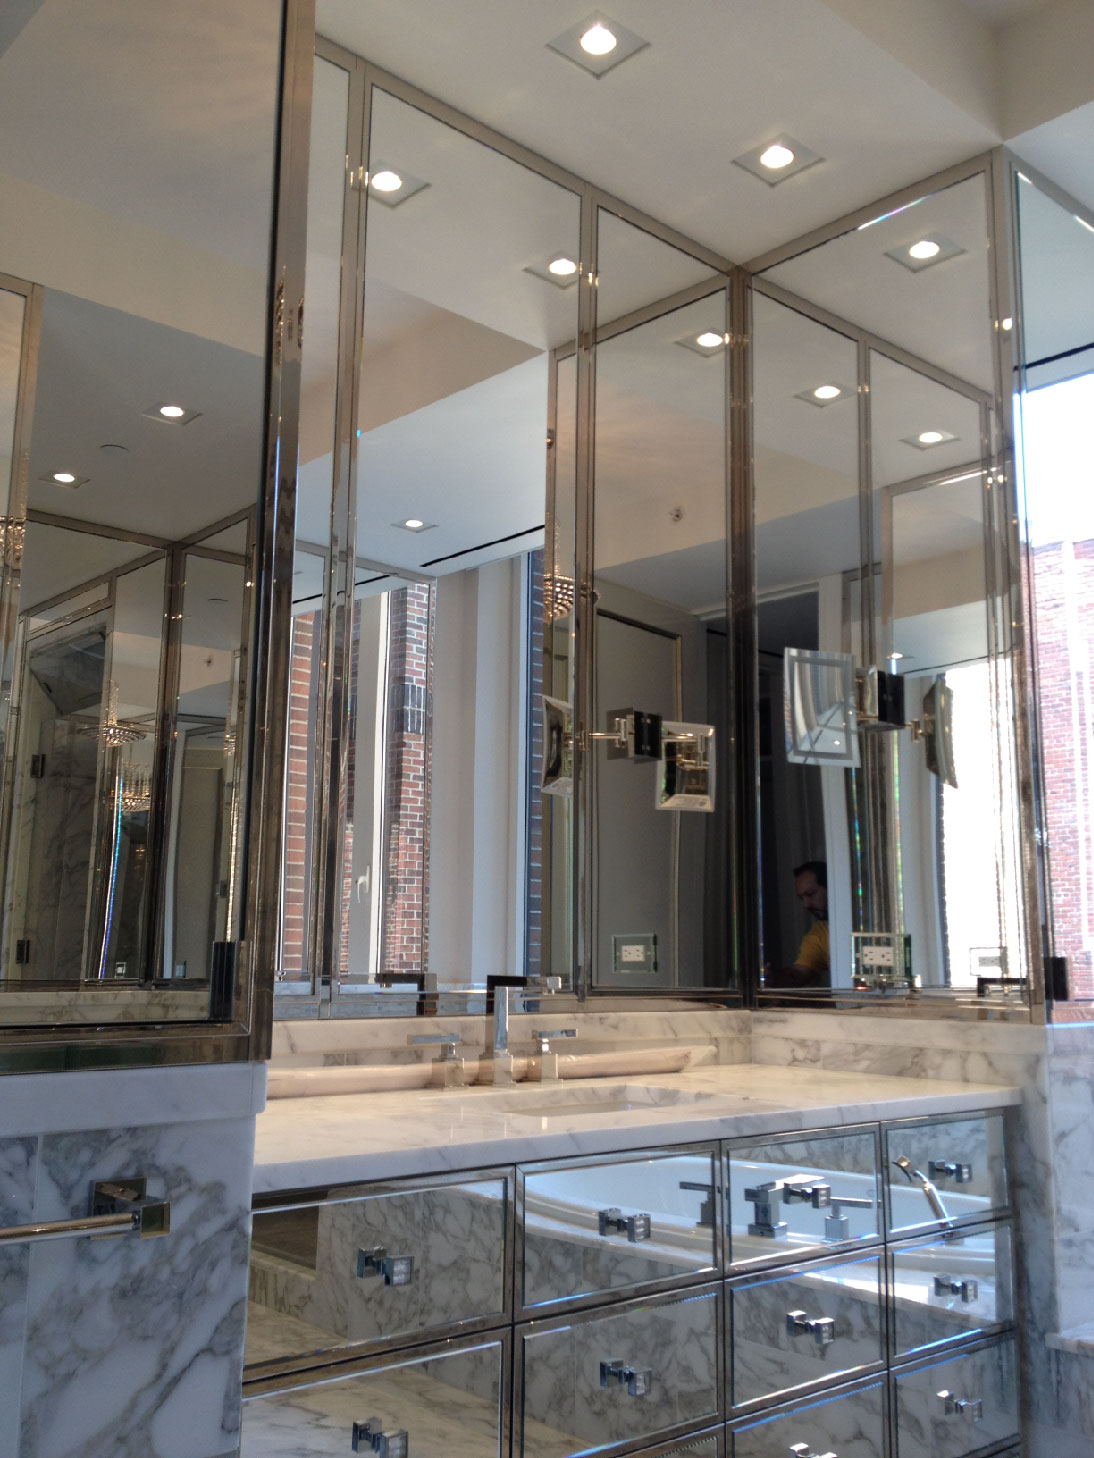 The Benefits Of Adding Bathroom Mirrors To Counters And Cupboards